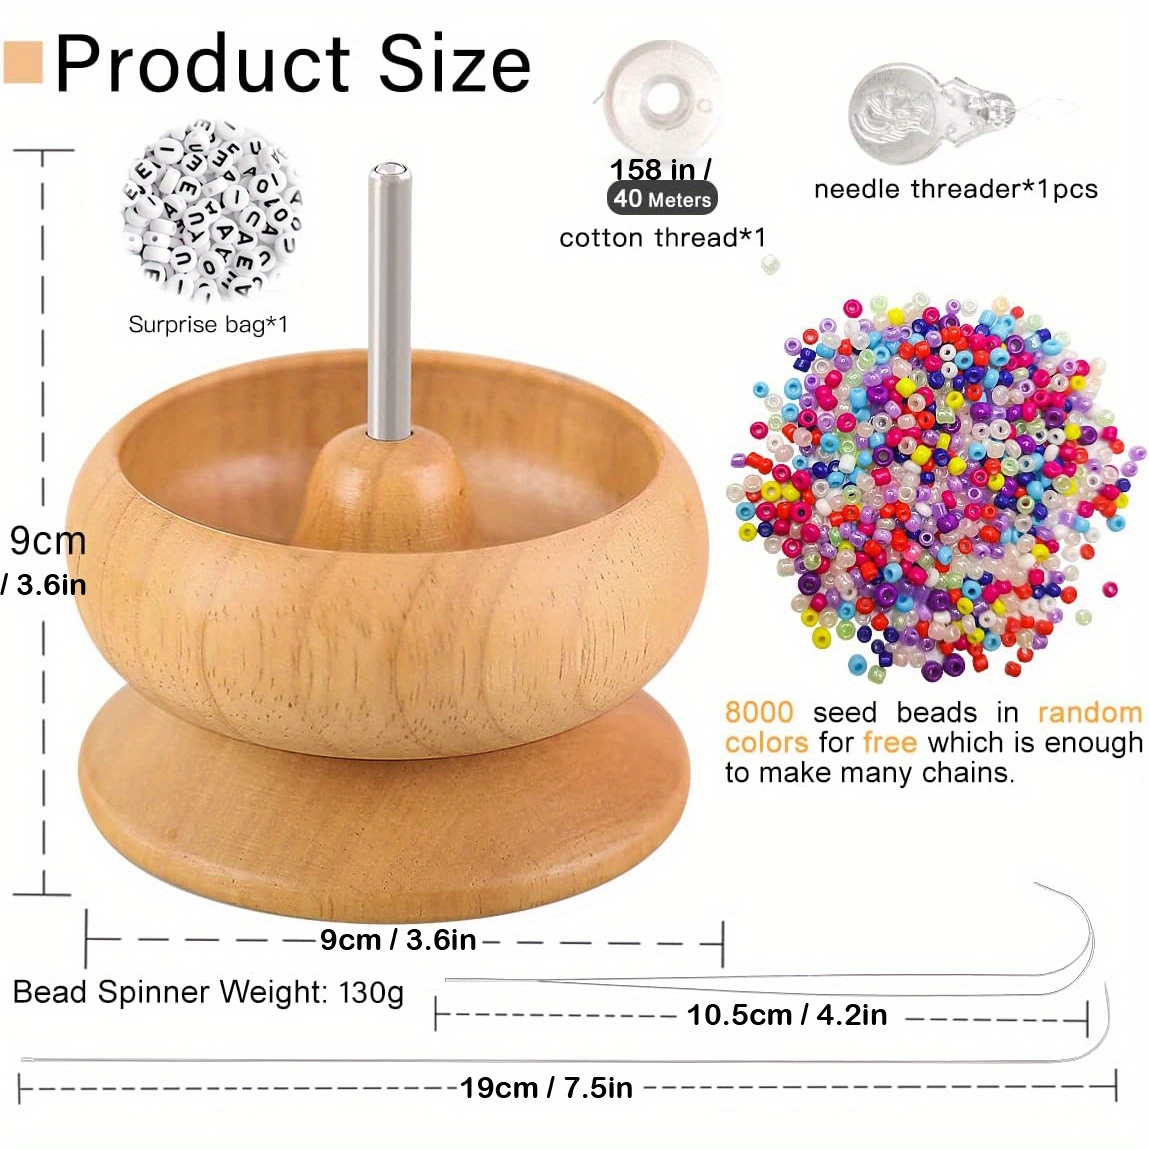 DIY Making Bead Spinner,with 2pcs Exlarge Eye Beading Needles,Wooden Spin Bead Loader for DIY Seed Beads, Waist Beads, Bracelets